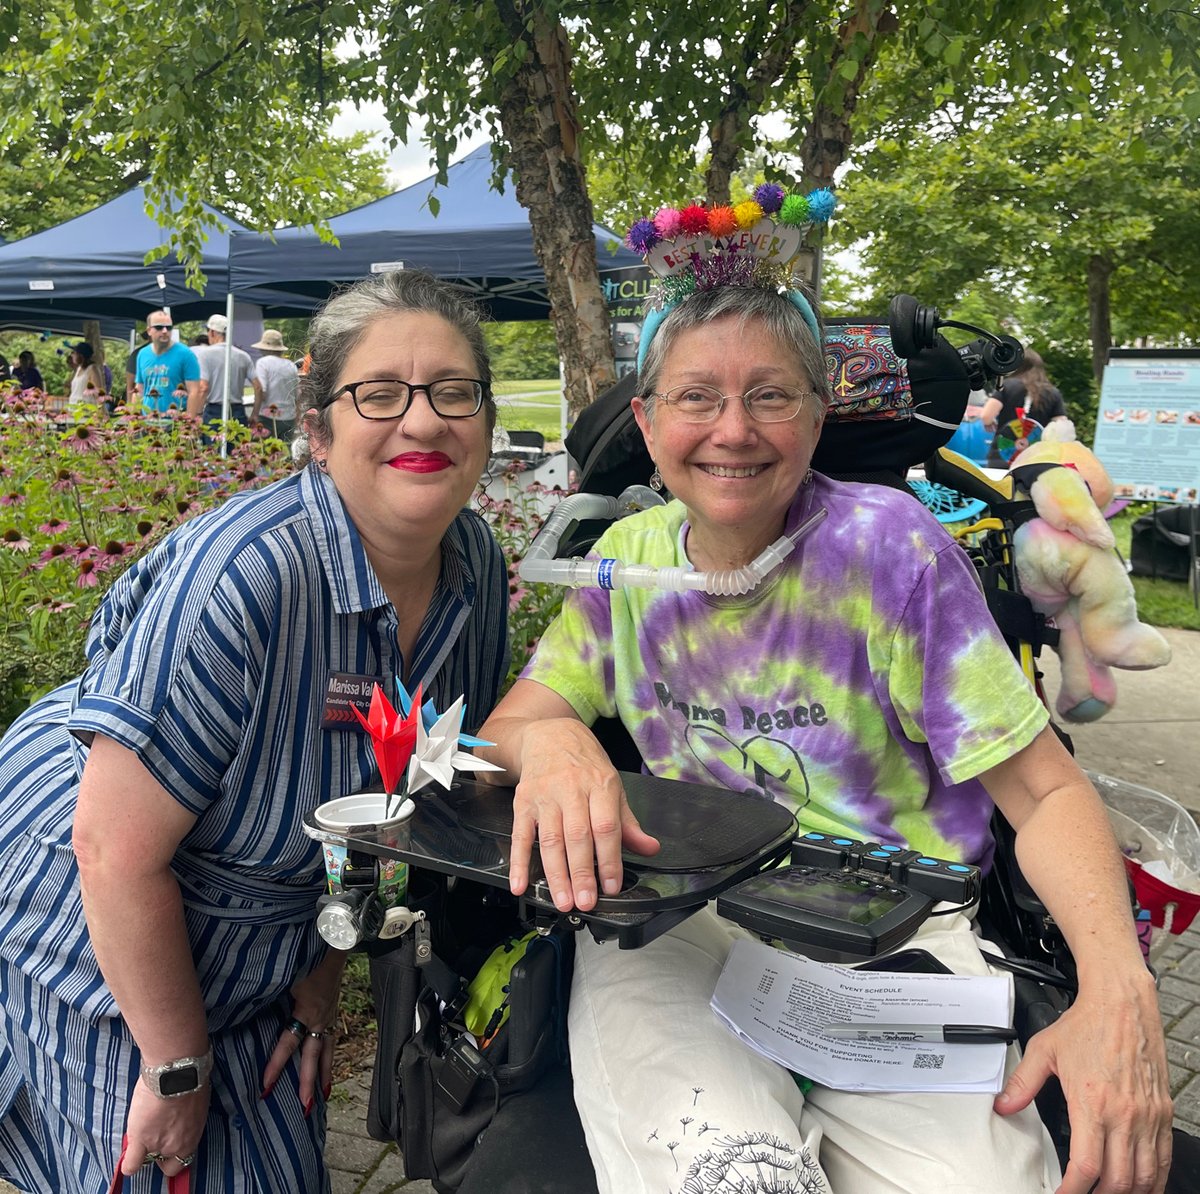 I had an amazing morning at the 2023 Peace Day celebration! It might have been hot, but the love and positivity present negated the heat. Mama Peace (Jeni Stepanek) brought so much joy and kindness together. She’s the best!

#PeaceMatters #MattieMatters #YouMatter #WeMatter